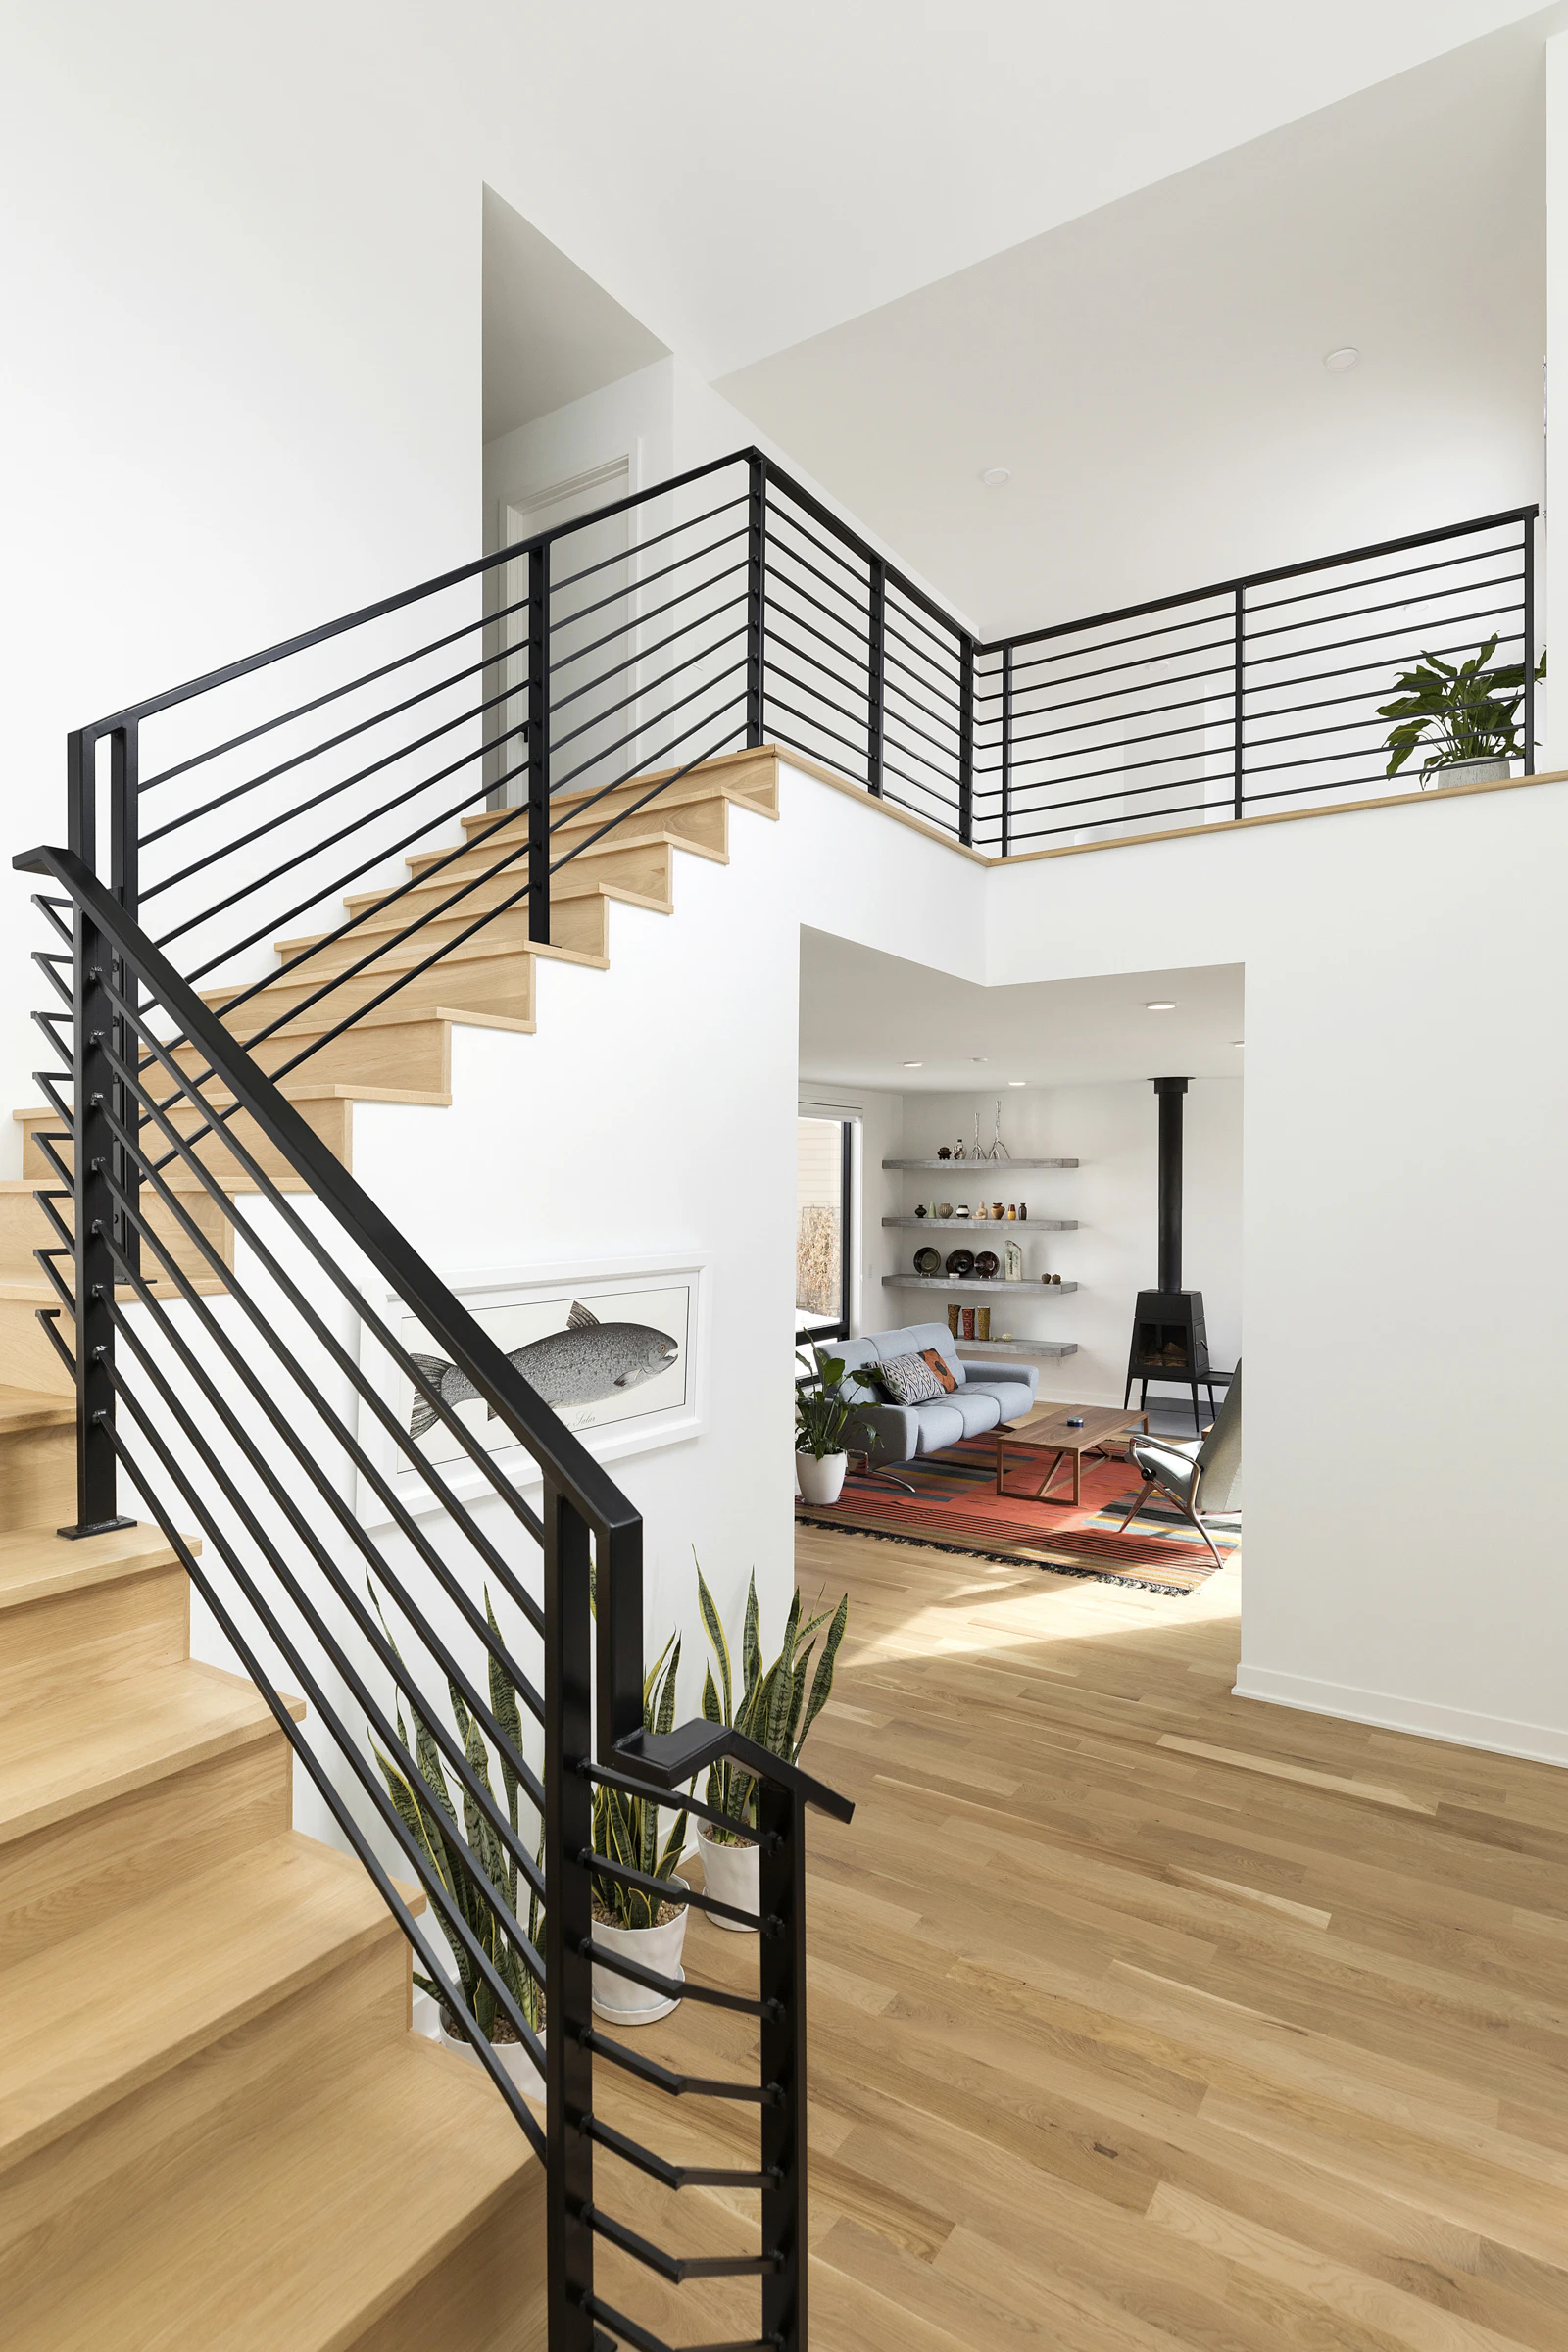 Staircase with metal railing